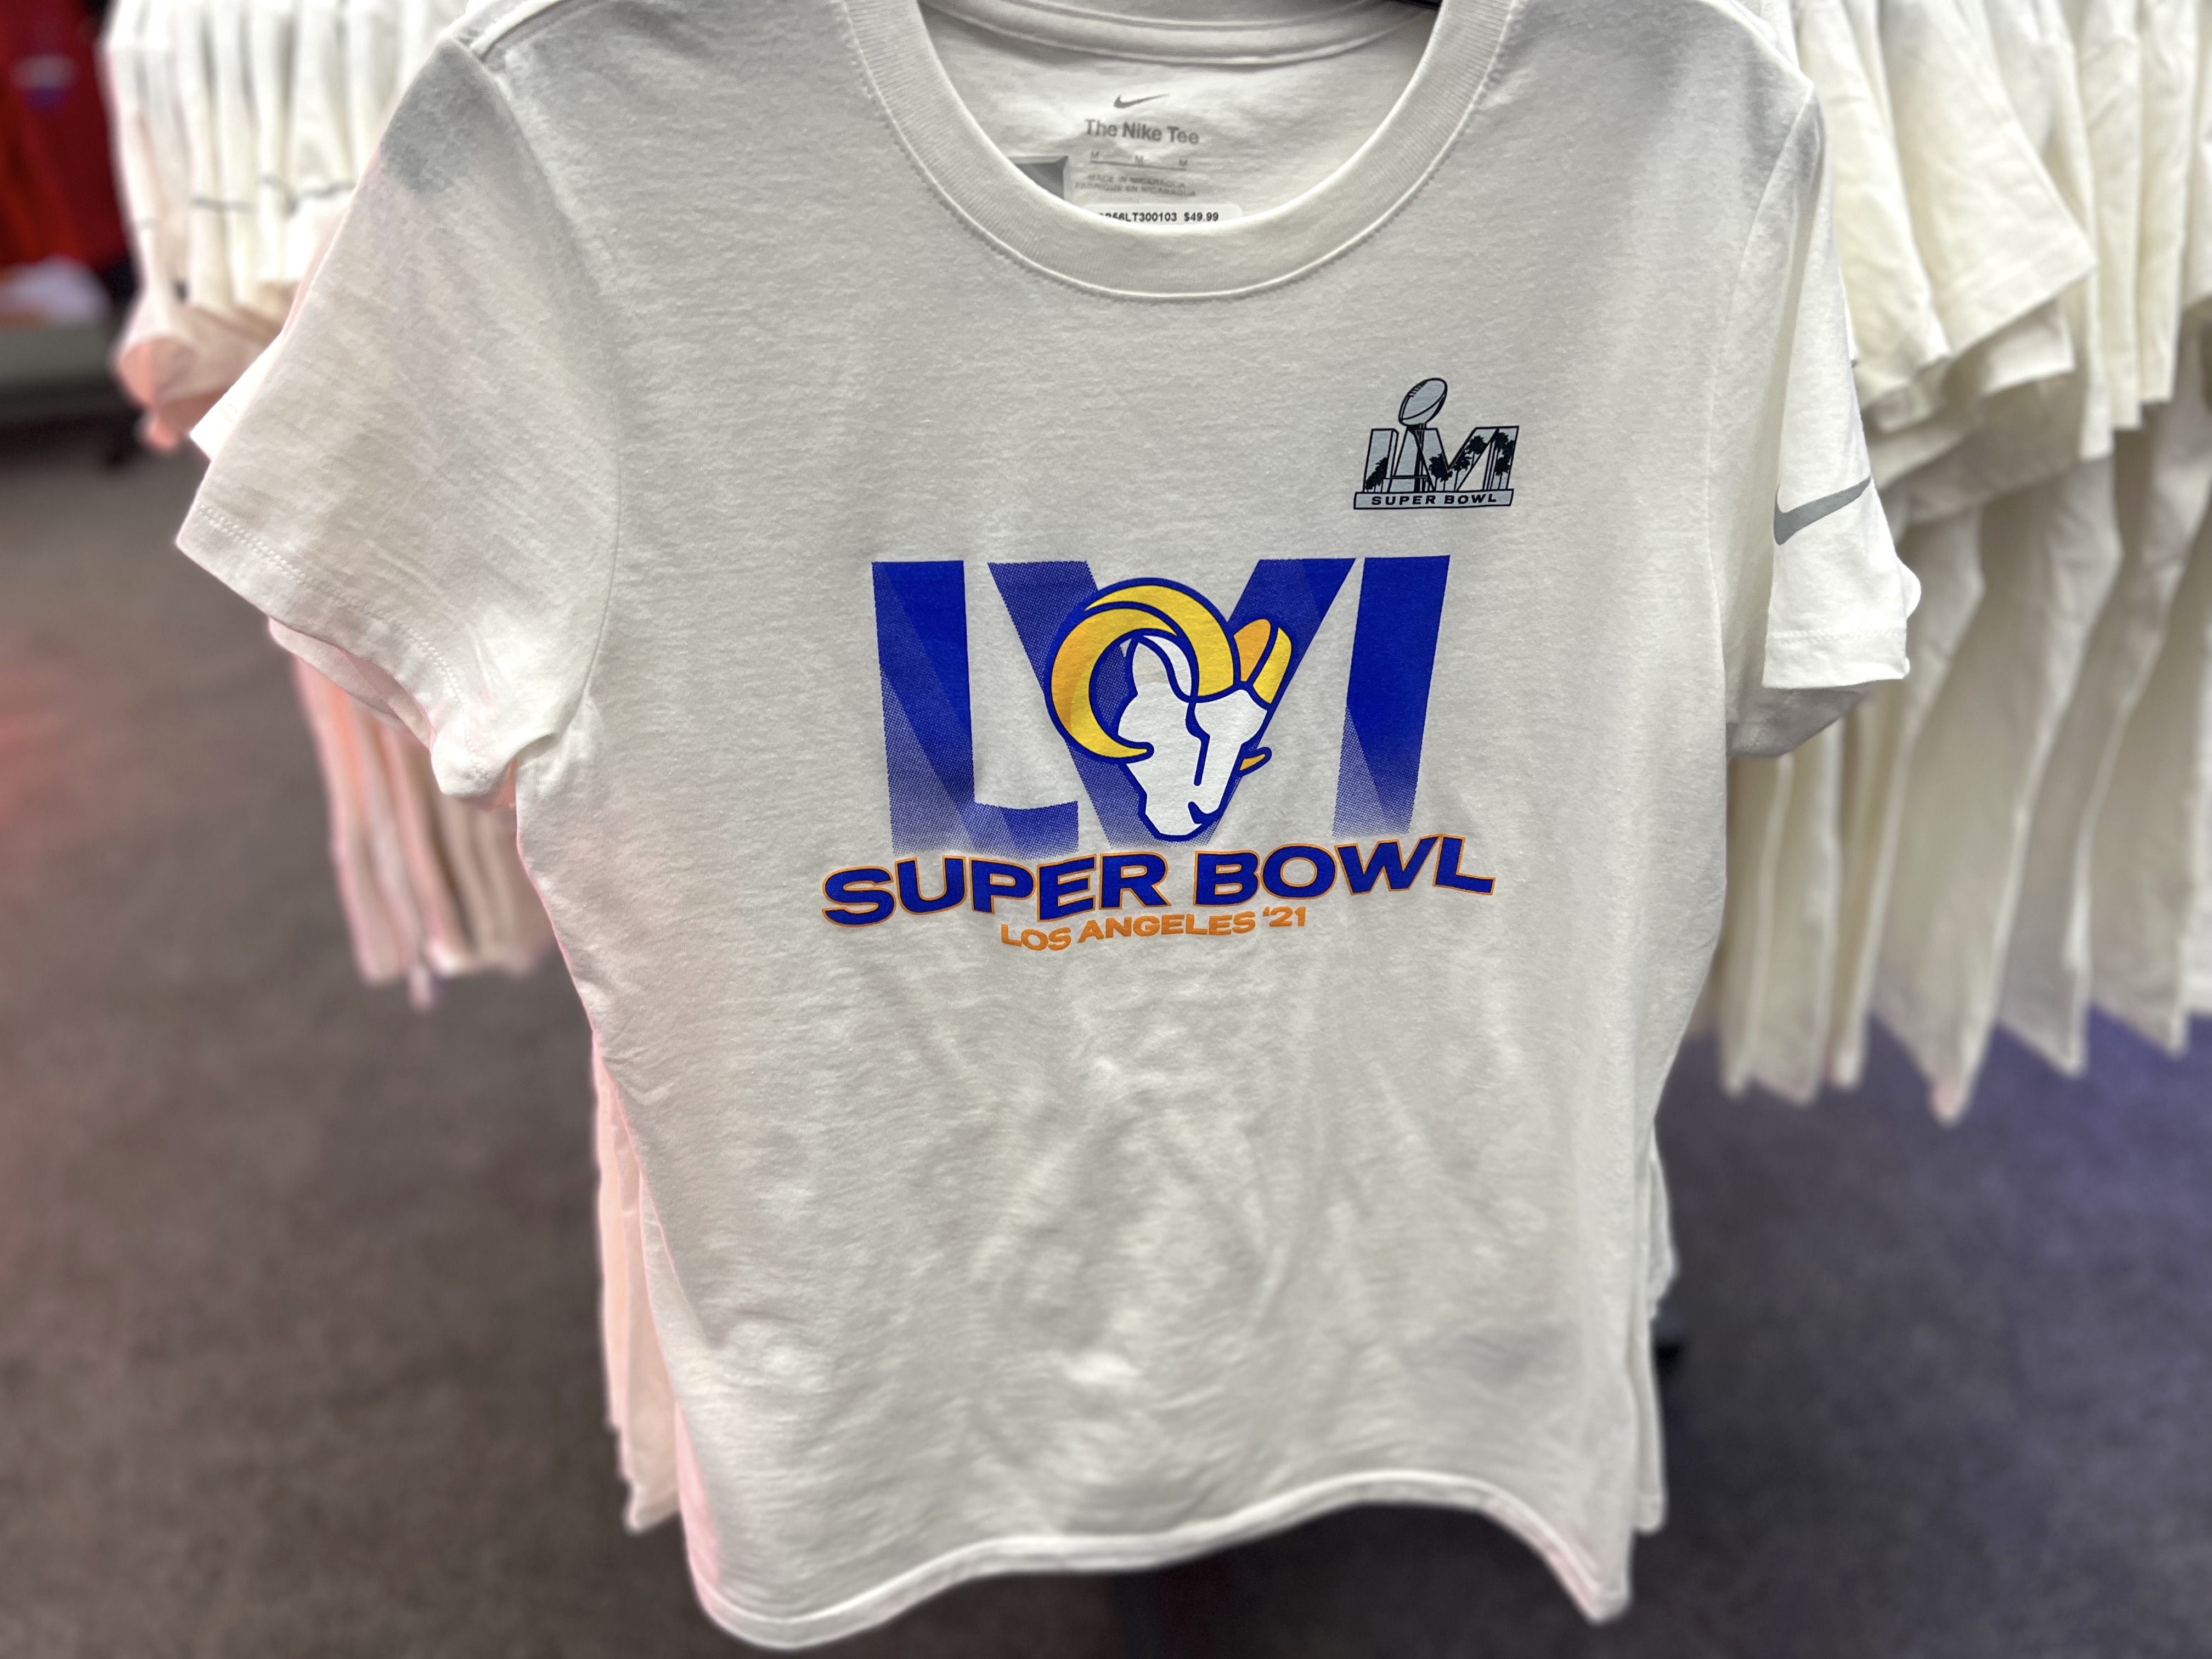 Rams Super Bowl Jerseys Get Gameday Ready With Super Bowl LVI Patch 